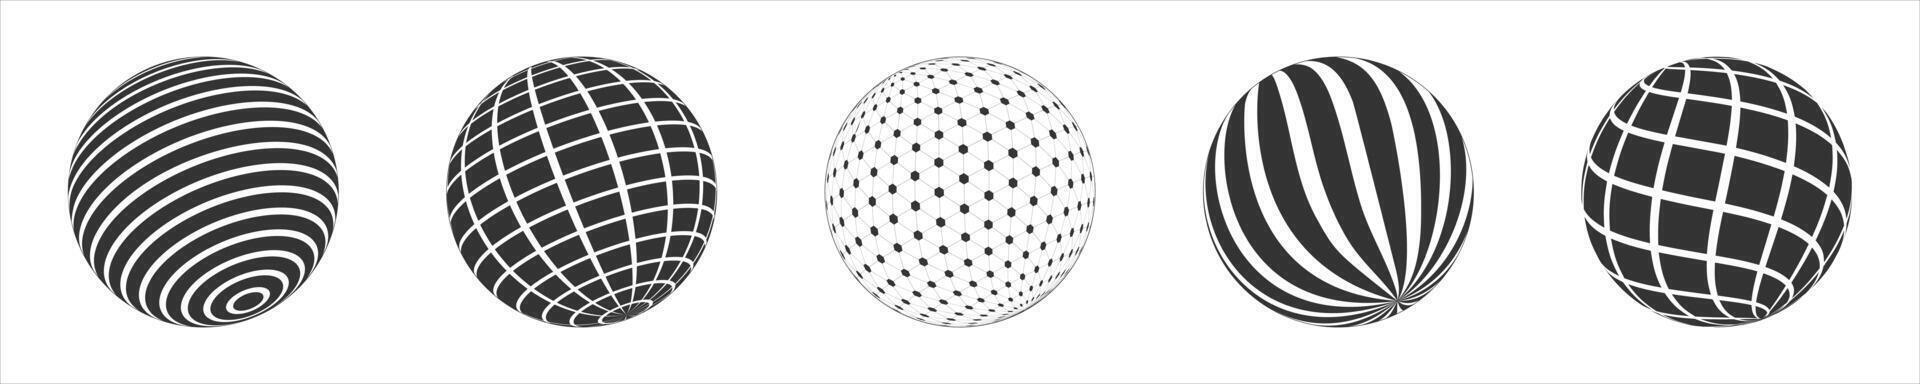 Set of 3D sphere wireframe icons in brutalism style. Orbit models, spherical shapes, different balls with grid and striped patterns vector